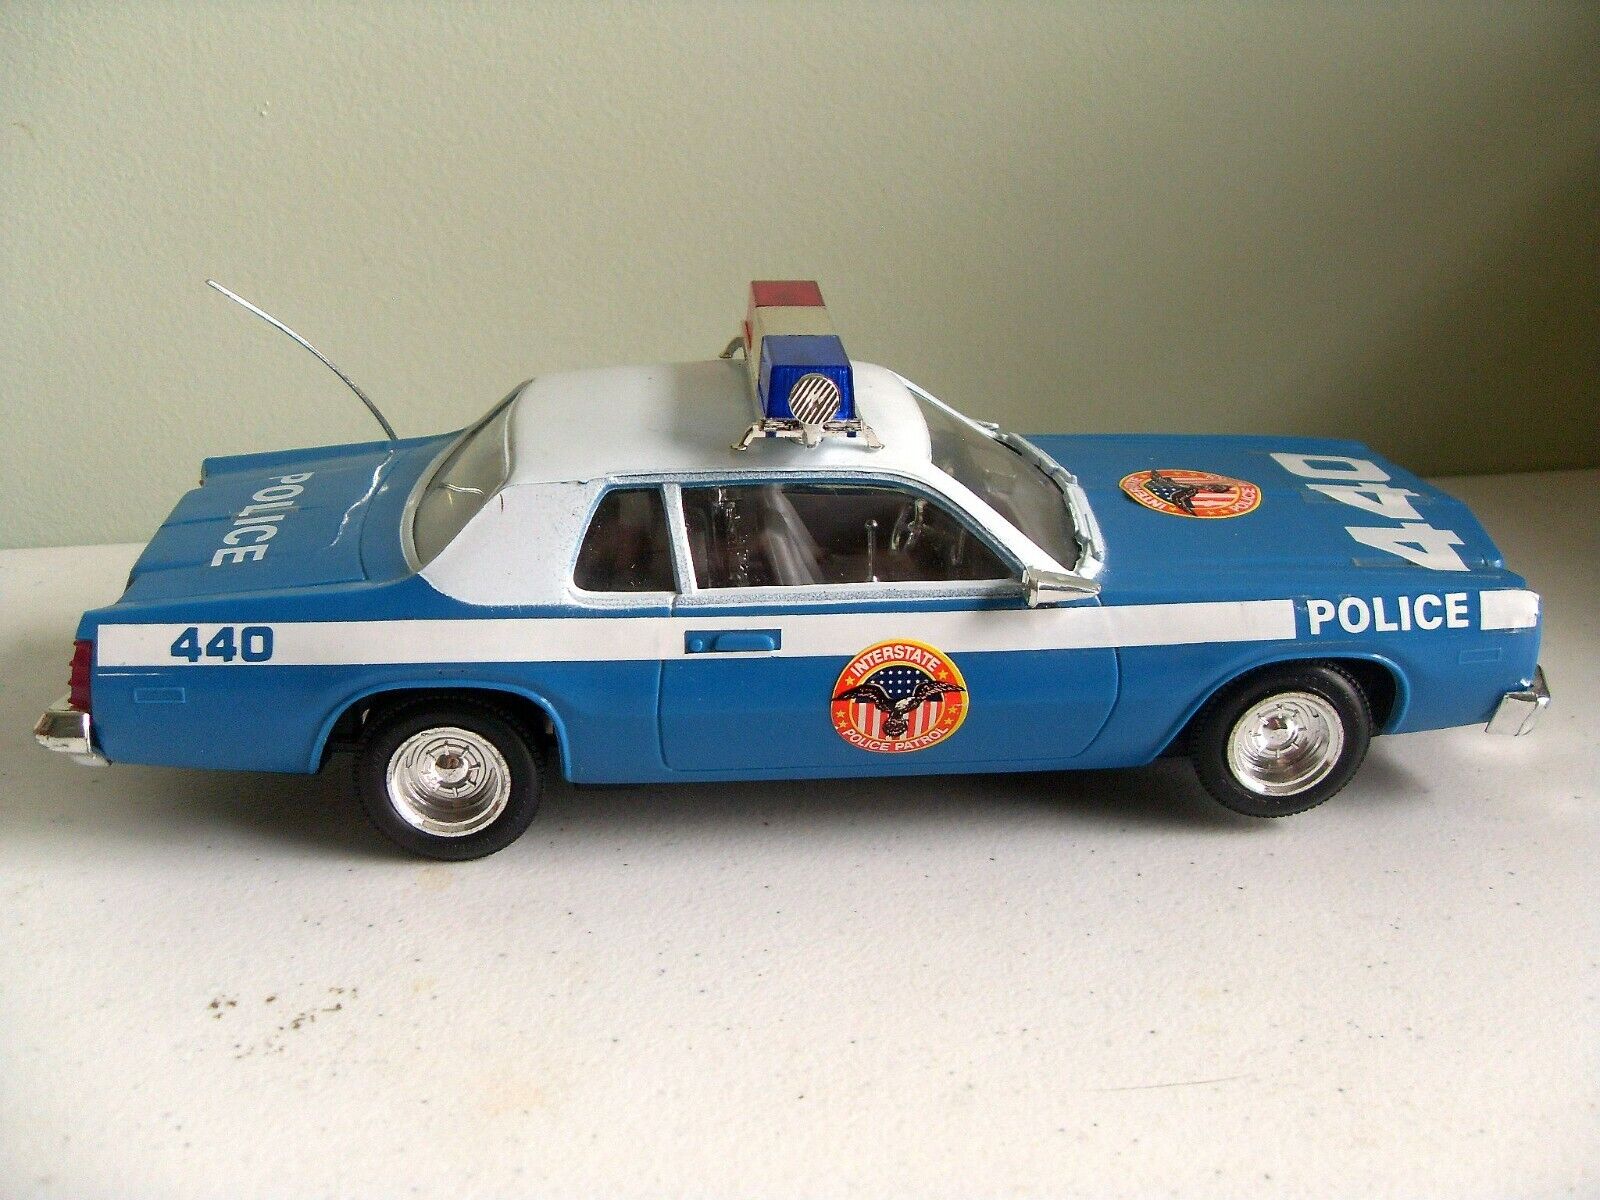 Vintage State Police Patrol Car 440 Bump n' Go Battery Operated Not Working 